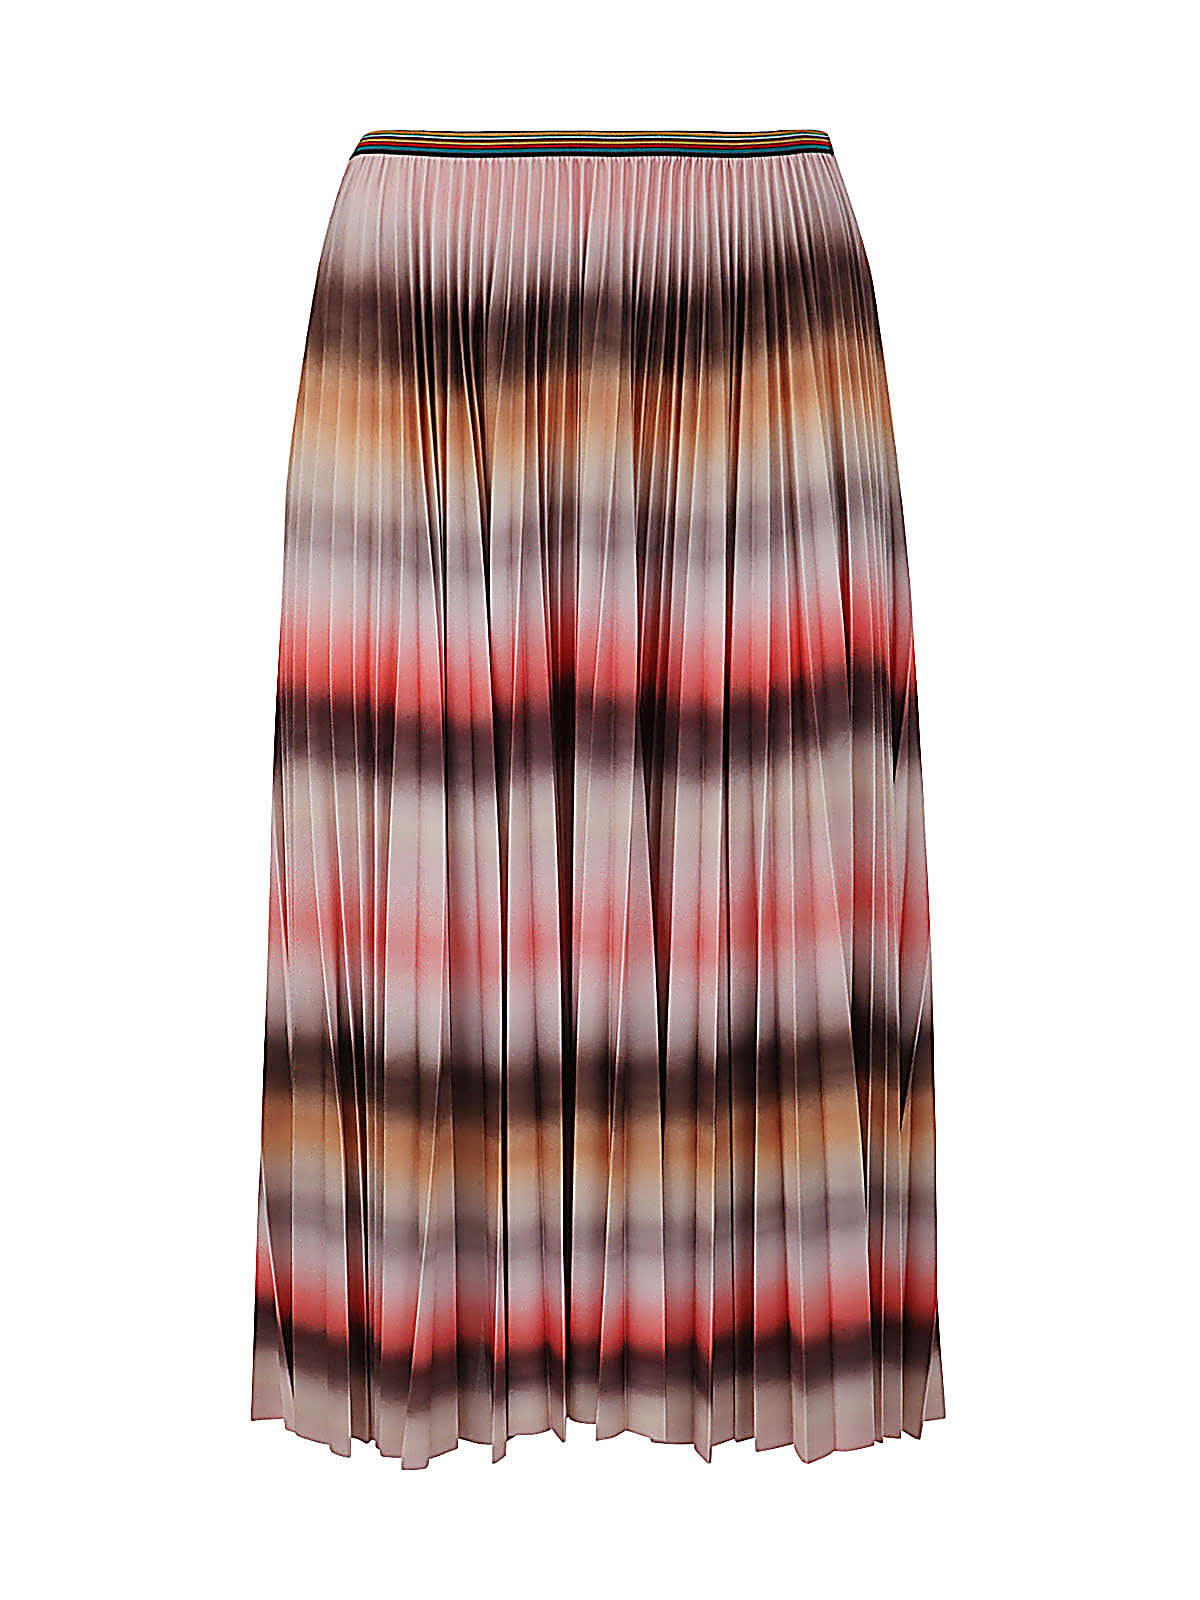 PAUL SMITH PLISSE` SKIRT MULTICOLOR AND NUANCED